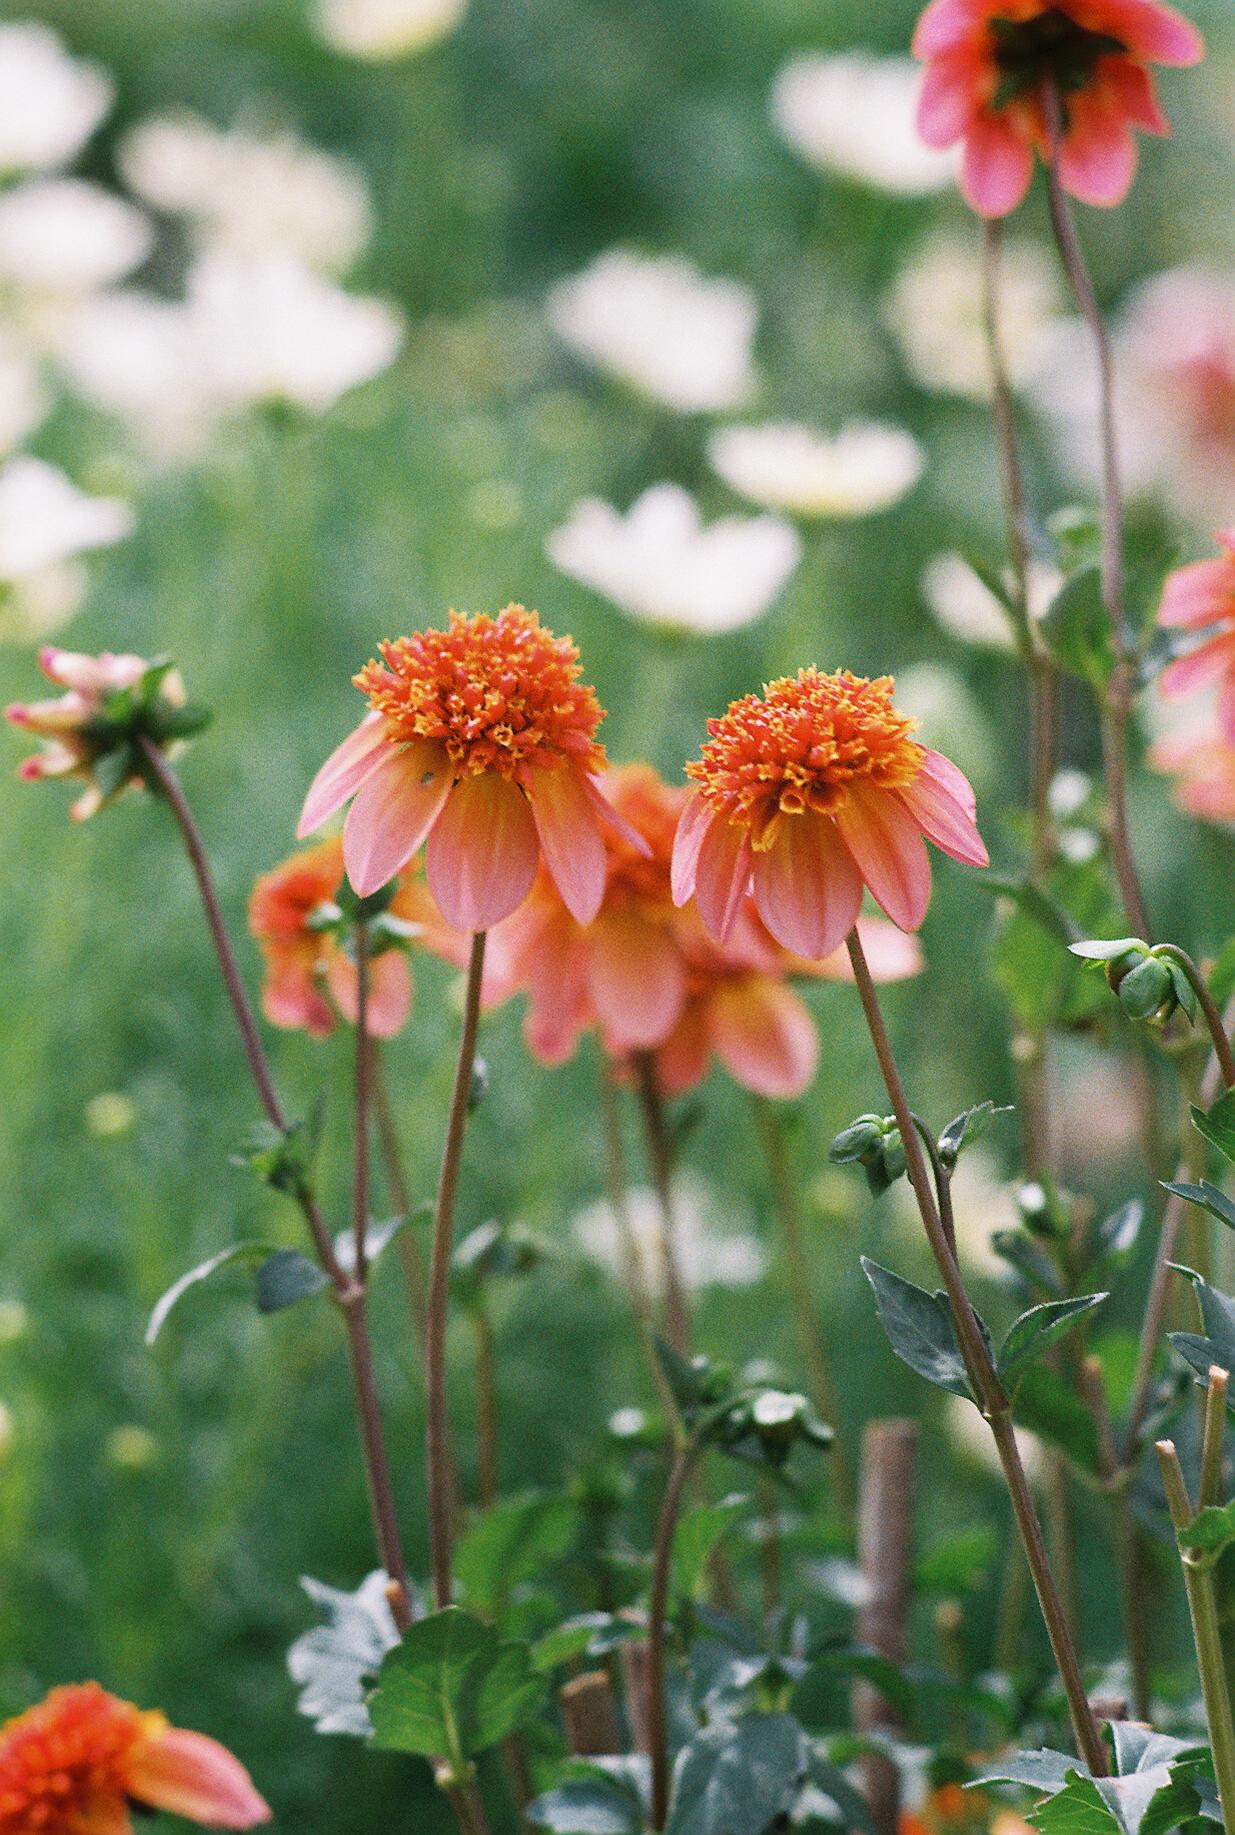 Small pink and orange flowers